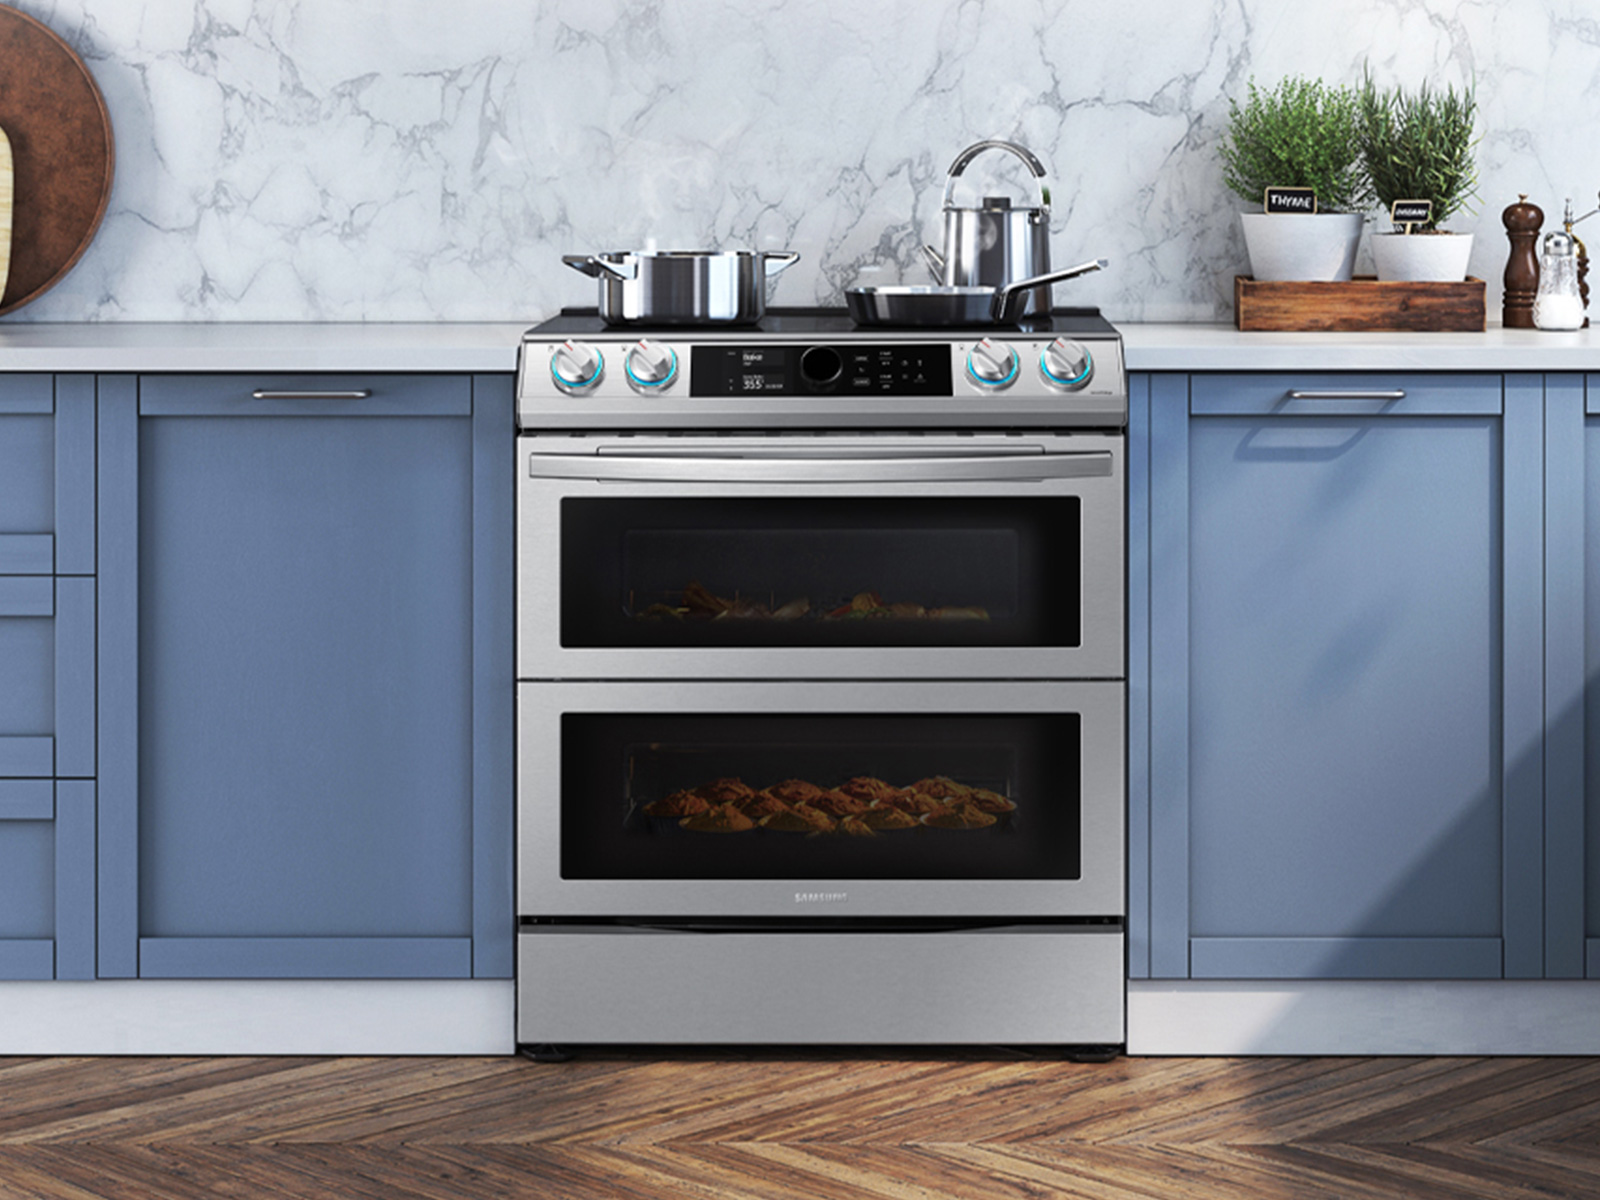 Thumbnail image of 6.3 cu. ft. Smart Slide-in Induction Range with Flex Duo™, Smart Dial & Air Fry in Stainless Steel